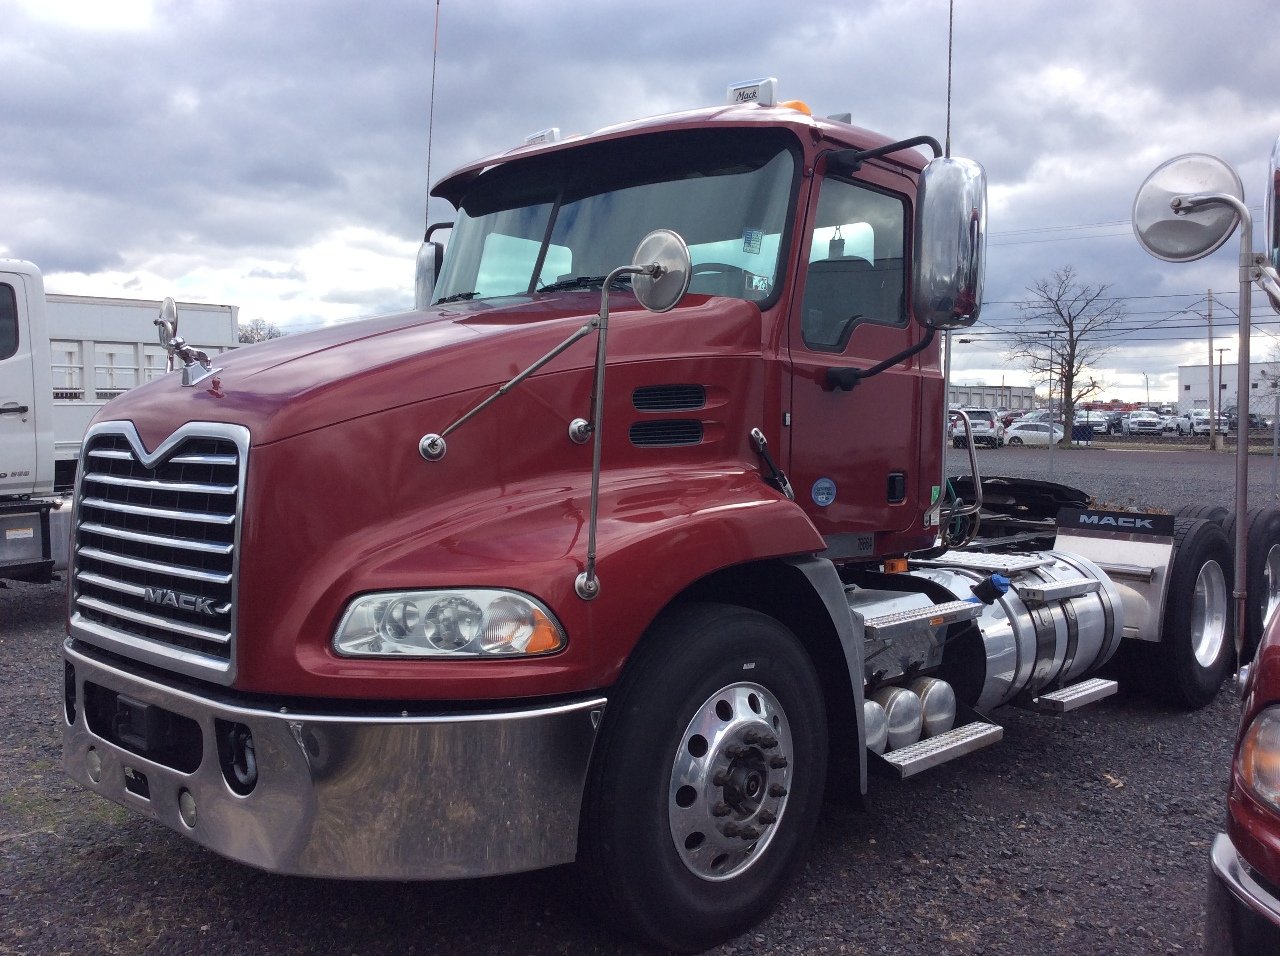 Used Truck Inventory - 1001883 01 2 - 86